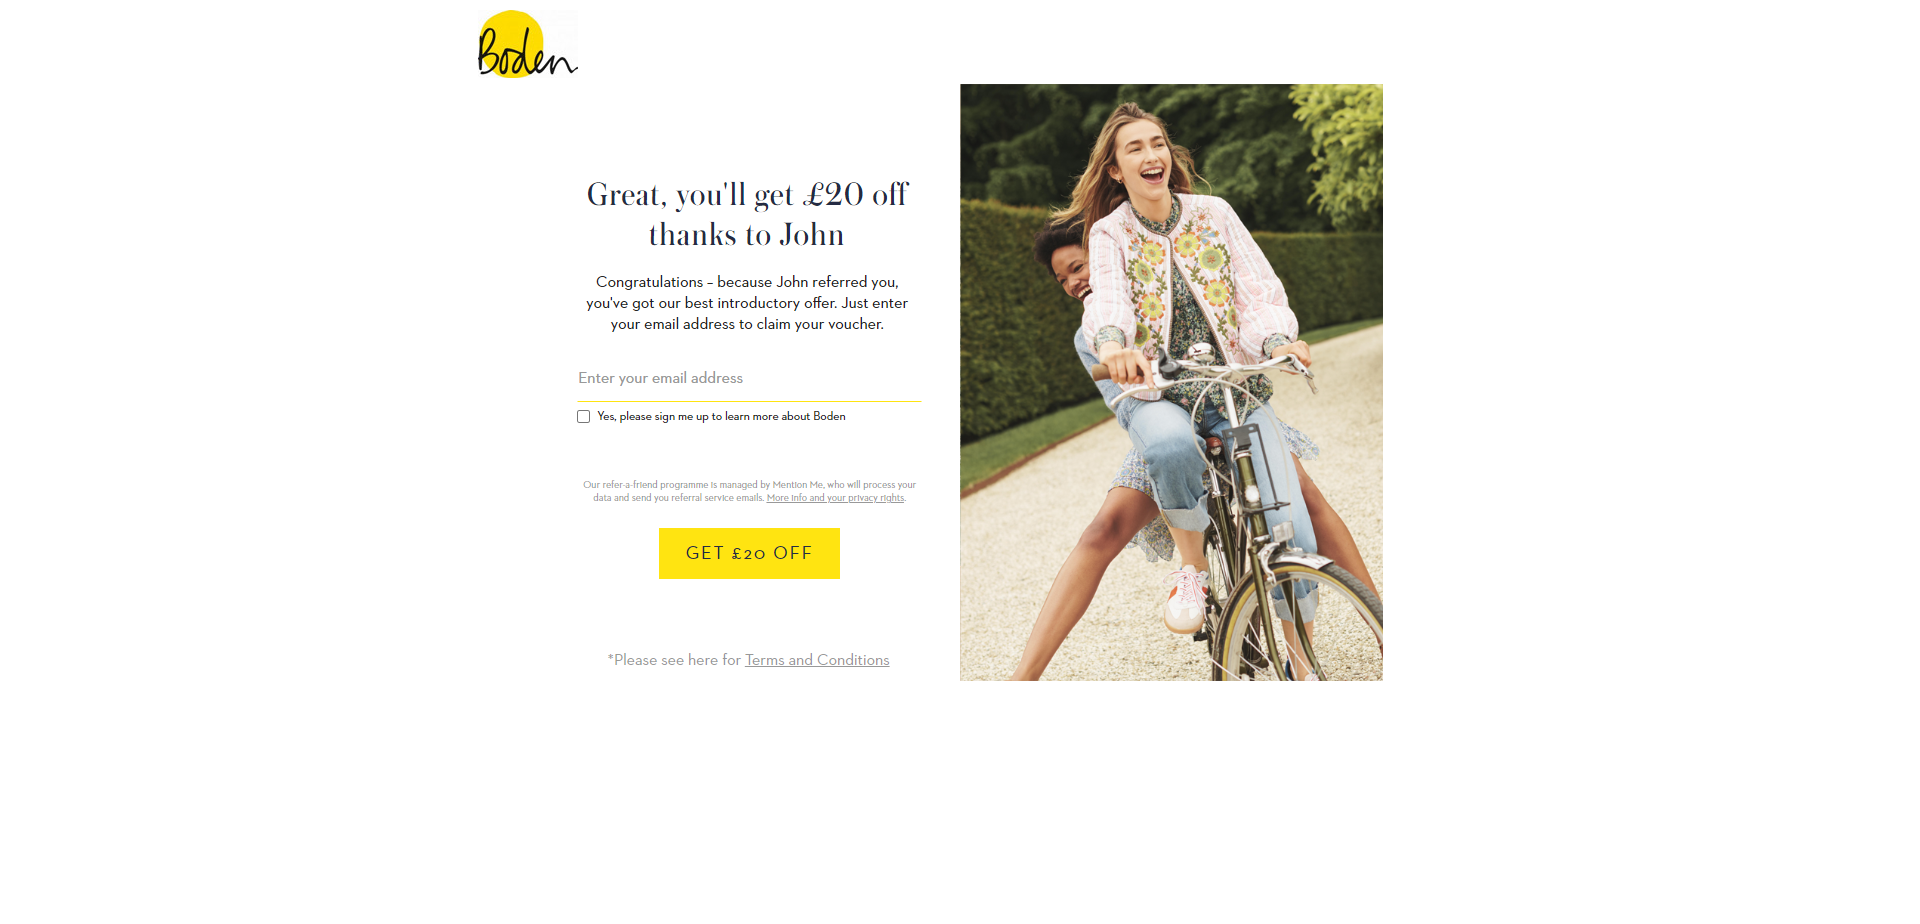 Referral Landing Page for Boden